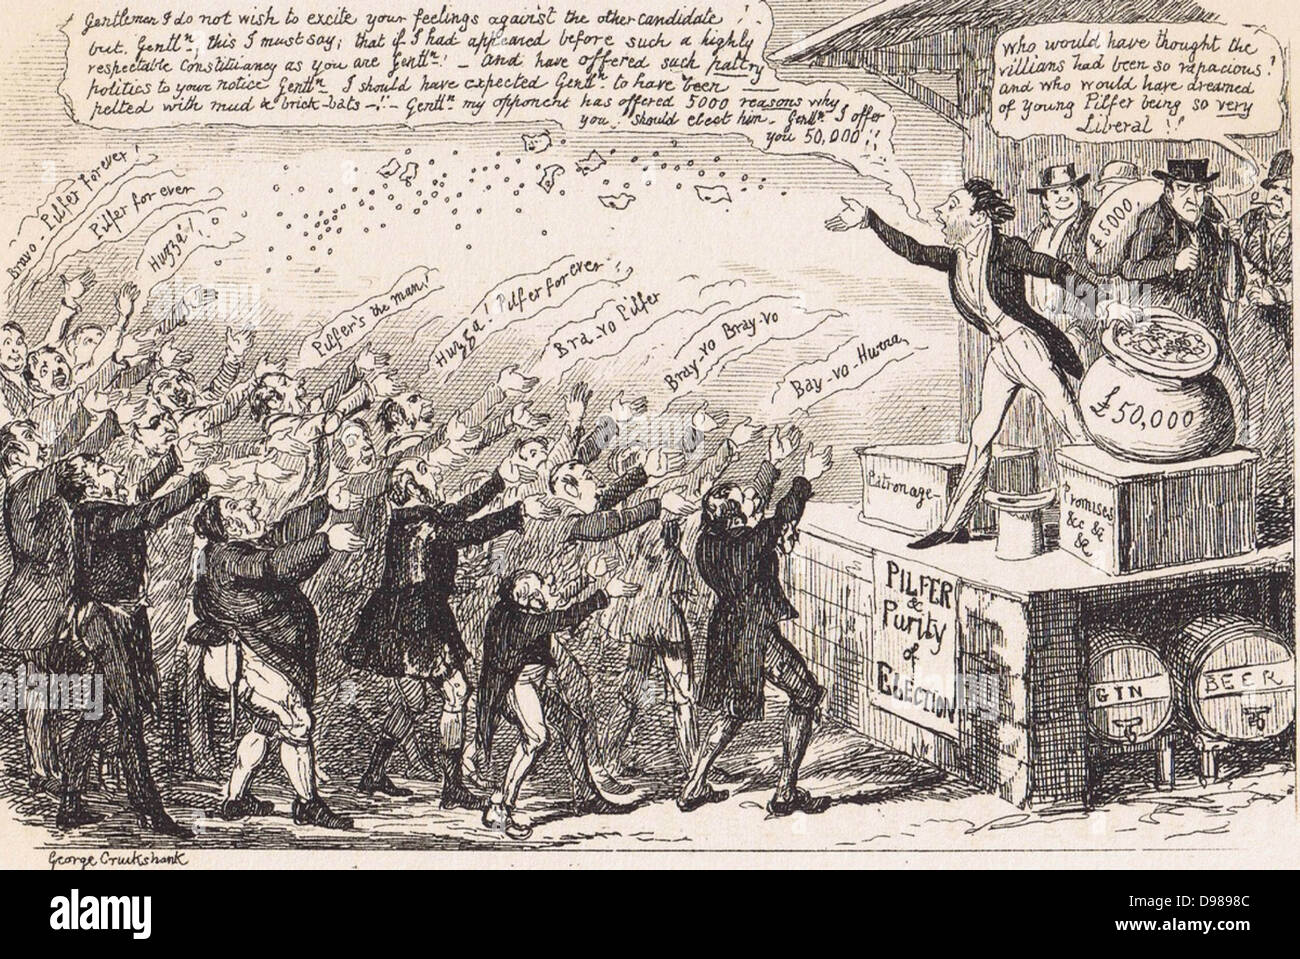 Show of Hands for a Liberal Candidate': Electioneering and Bribery with those with a vote holding up their hands to catch the money a Parliamentary candidate is throwing out to them. Cartoon by George Cruikshank published 1843. Stock Photo